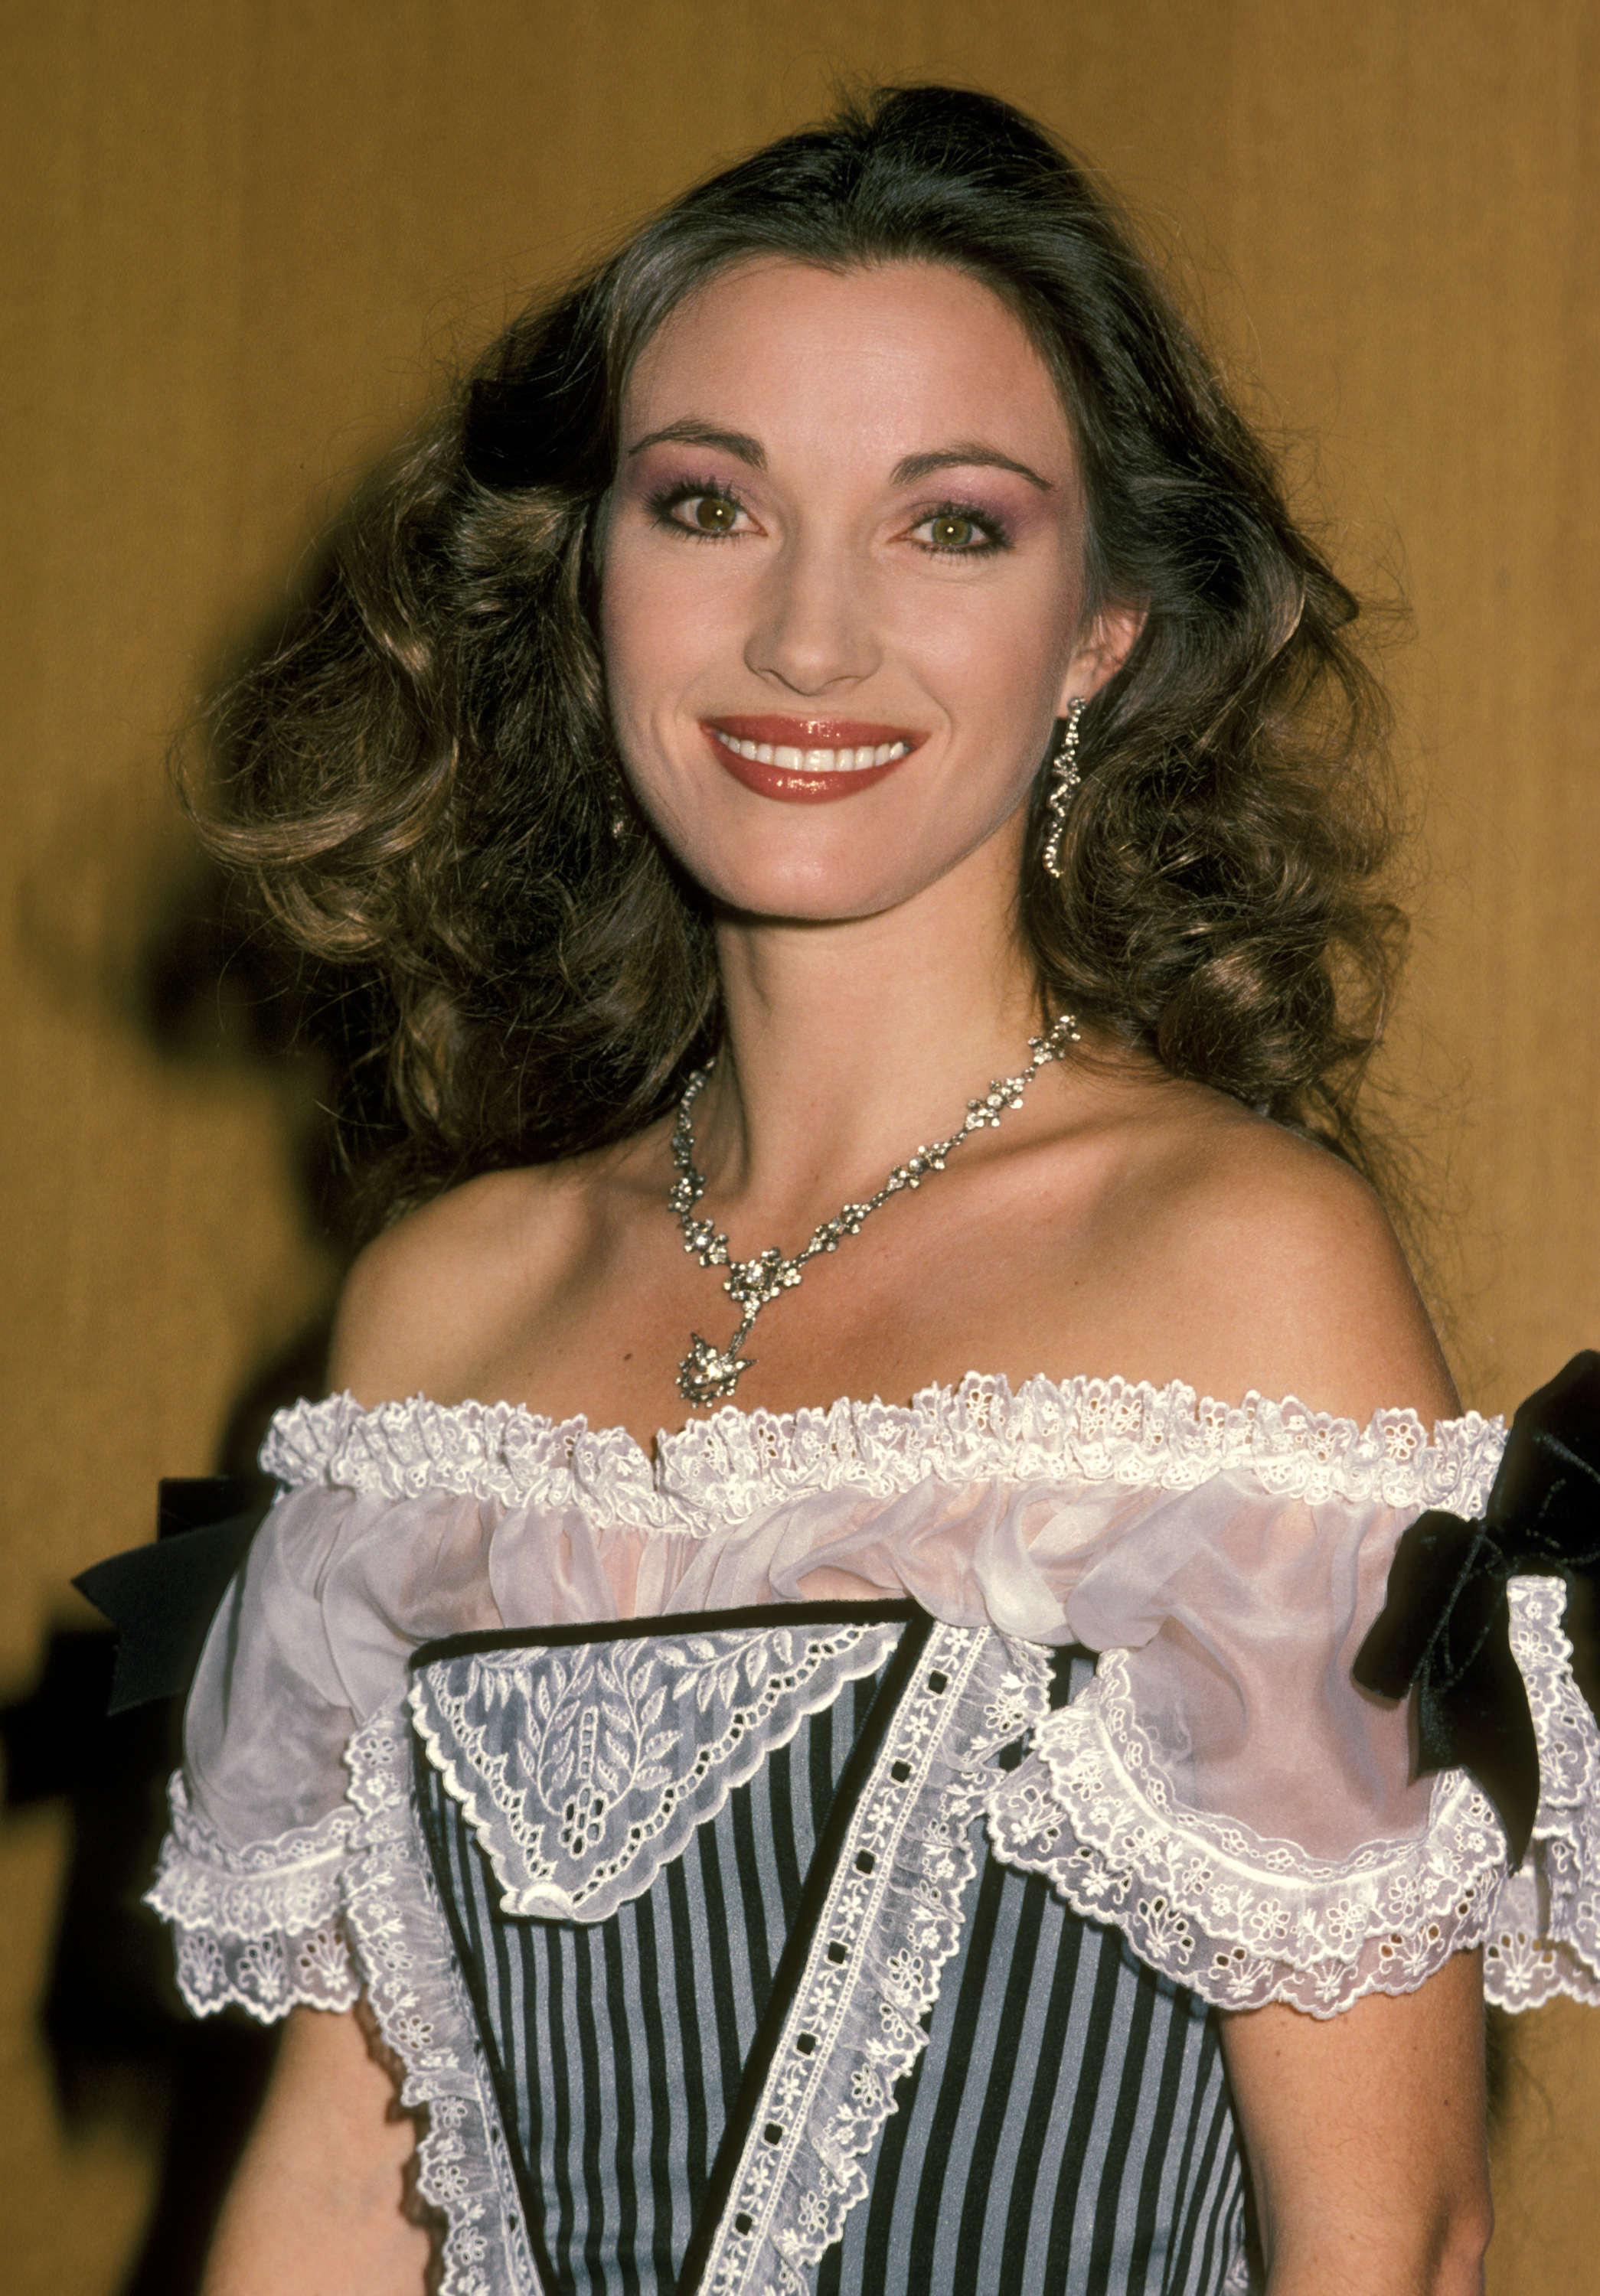 Jane Seymour at the "Stars Salute US Olympic Team" event on January 29, 1984 | Source: Getty Images